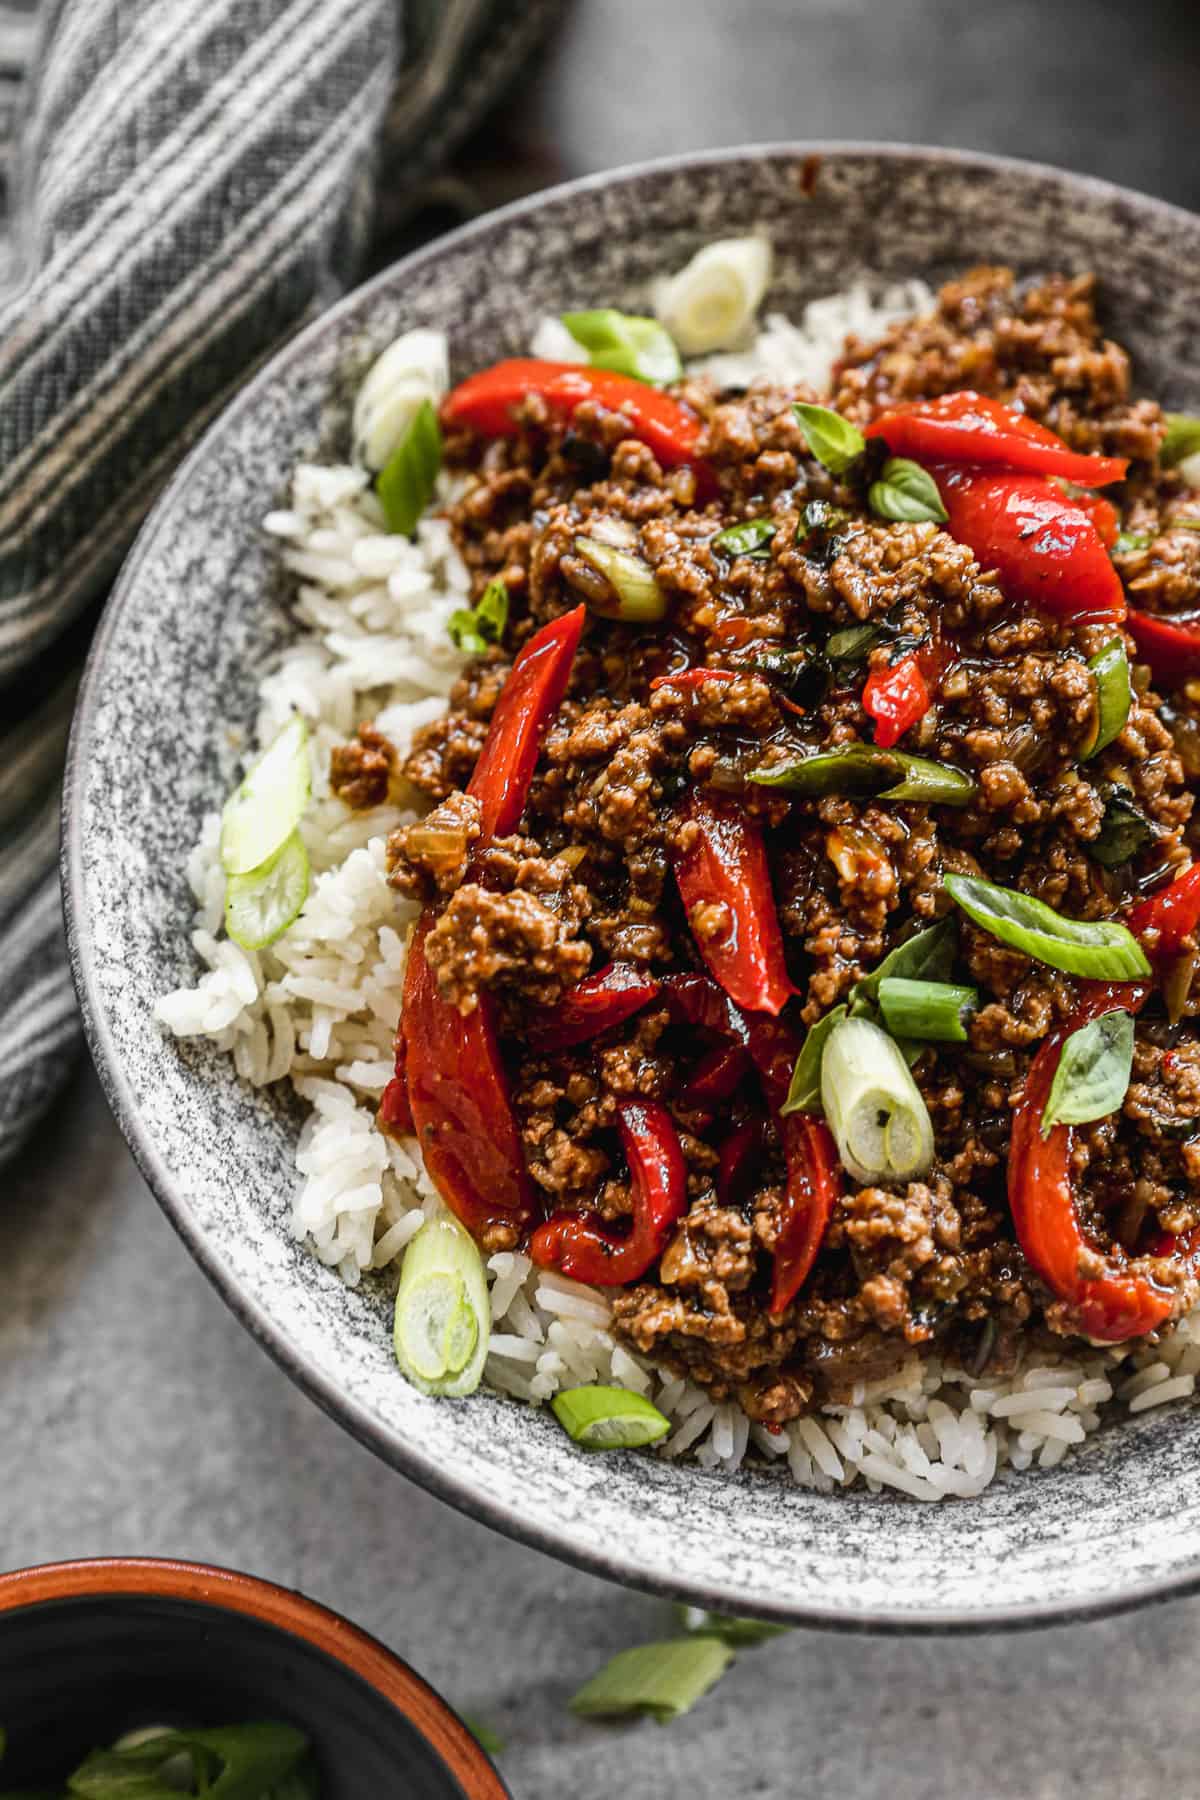 A close up image of an authentic Thai Basil Beef recipe with chopped green onions on top.